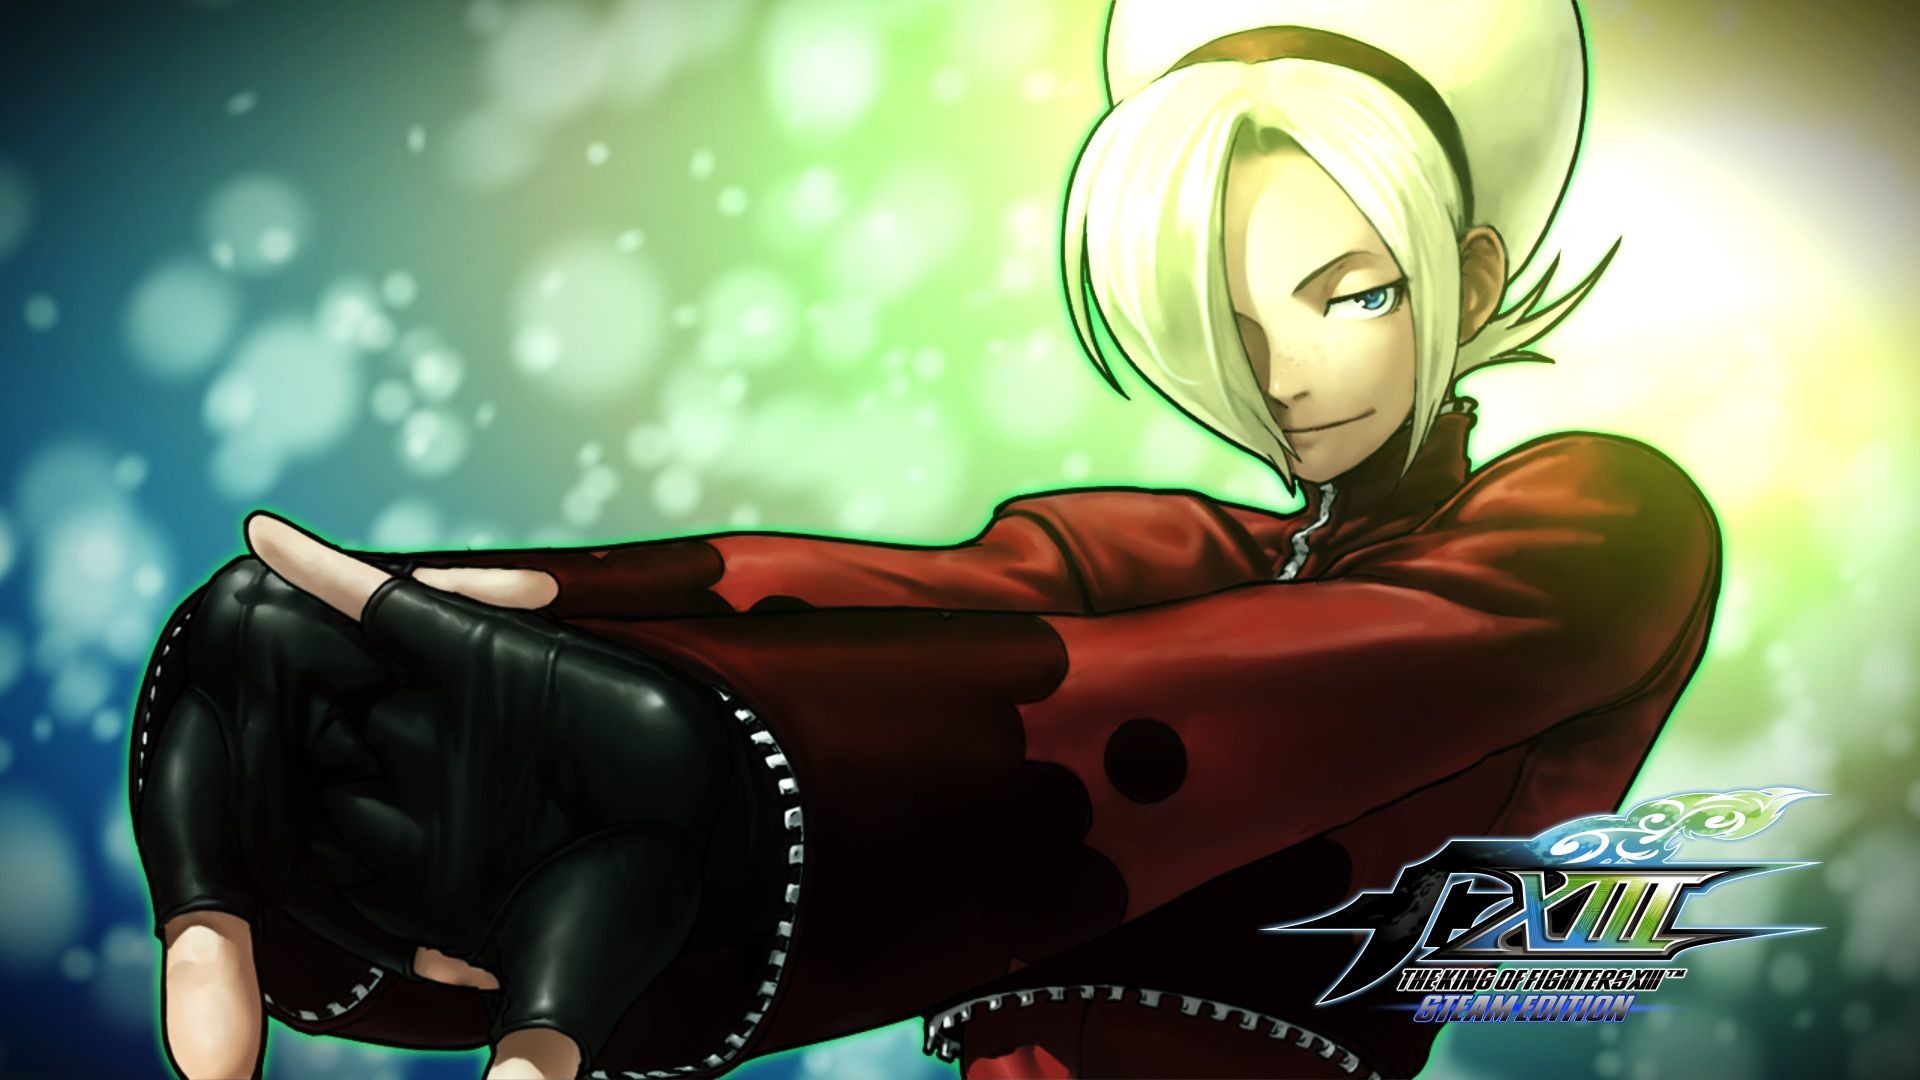 1920x1080 The King of Fighters XIII: Steam Edition wallpaper for desktop hd, 219 kB -  Acton Nash-Williams